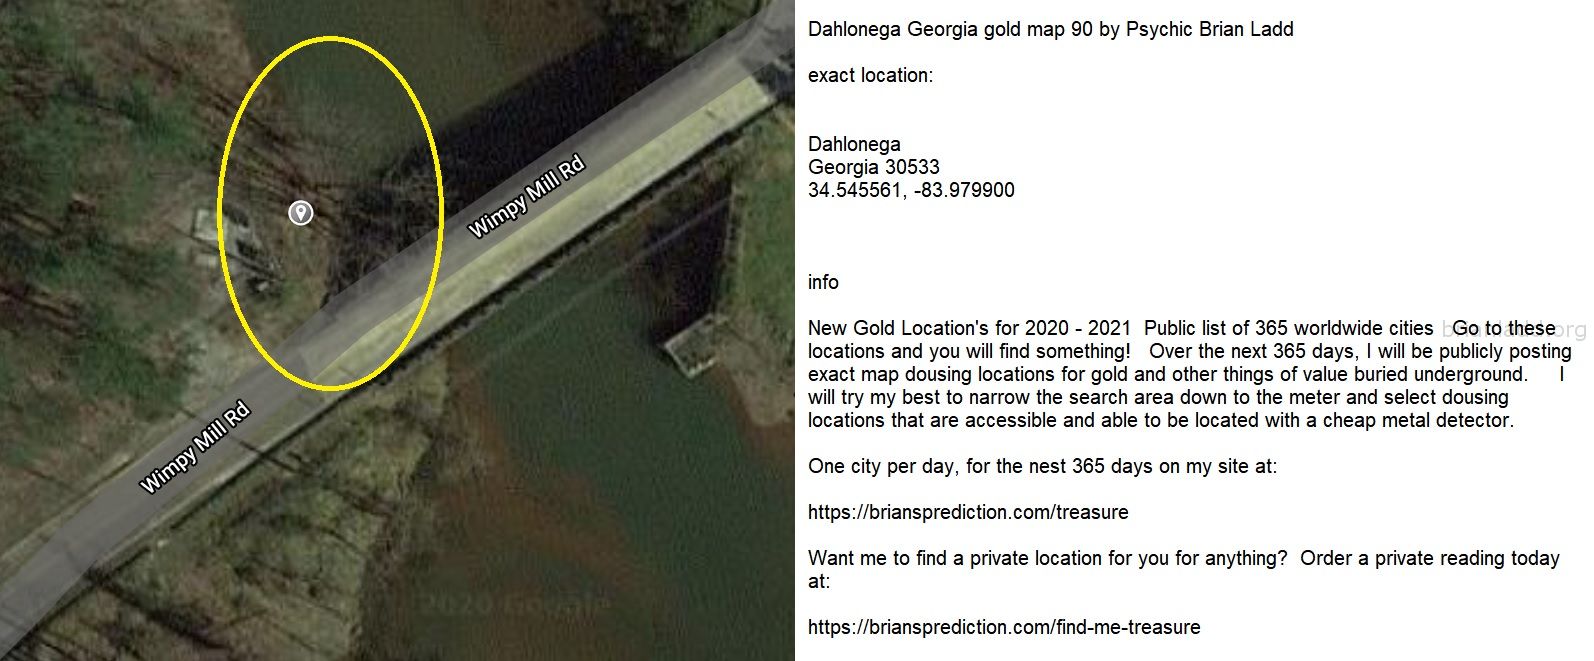 Dahlonega Georgia gold map 90 by Psychic Brian Ladd
New Gold Location's for 2020 - 2021  Public list of 365 worldwide cities   Go to these locations and you will find something!   Over the next 365 days, I will be publicly posting exact map dousing locations for gold and other things of value buried underground.     I will try my best to narrow the search area down to the meter and select dousing locations that are accessible and able to be located with a cheap metal detector. One city per day, for the nest 365 days on my site at:  https://briansprediction.com/treasure  Want me to find a private location for you for anything?  Order a private reading today at:  https://briansprediction.com/find-me-treasure
